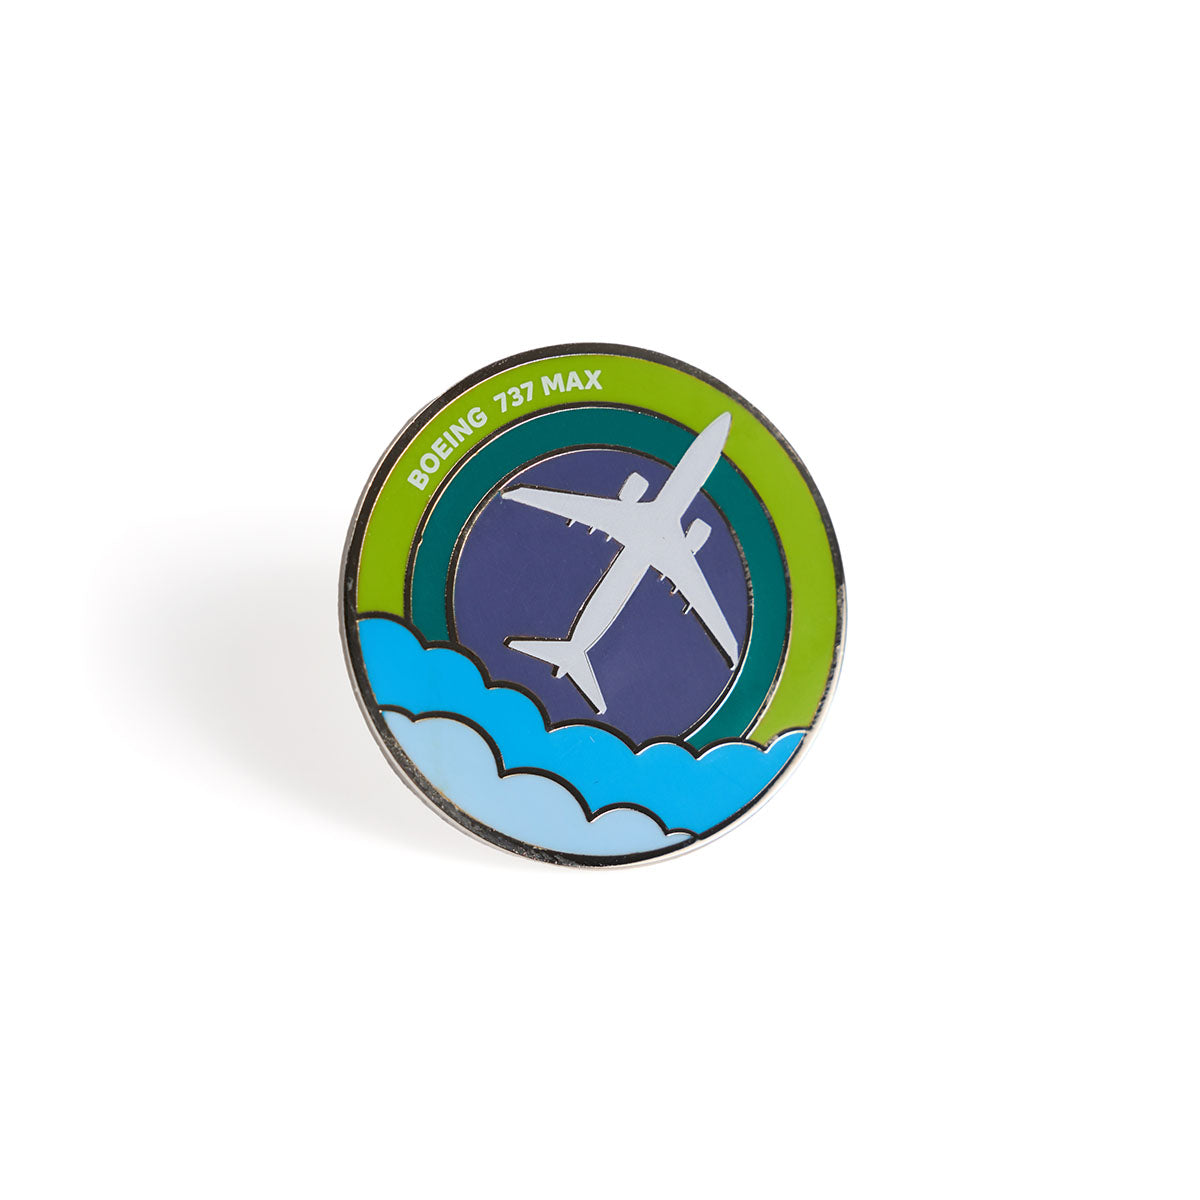  Skyward lapel pin, featuring the iconic Boeing 737 MAX in an enamel roundel design. 